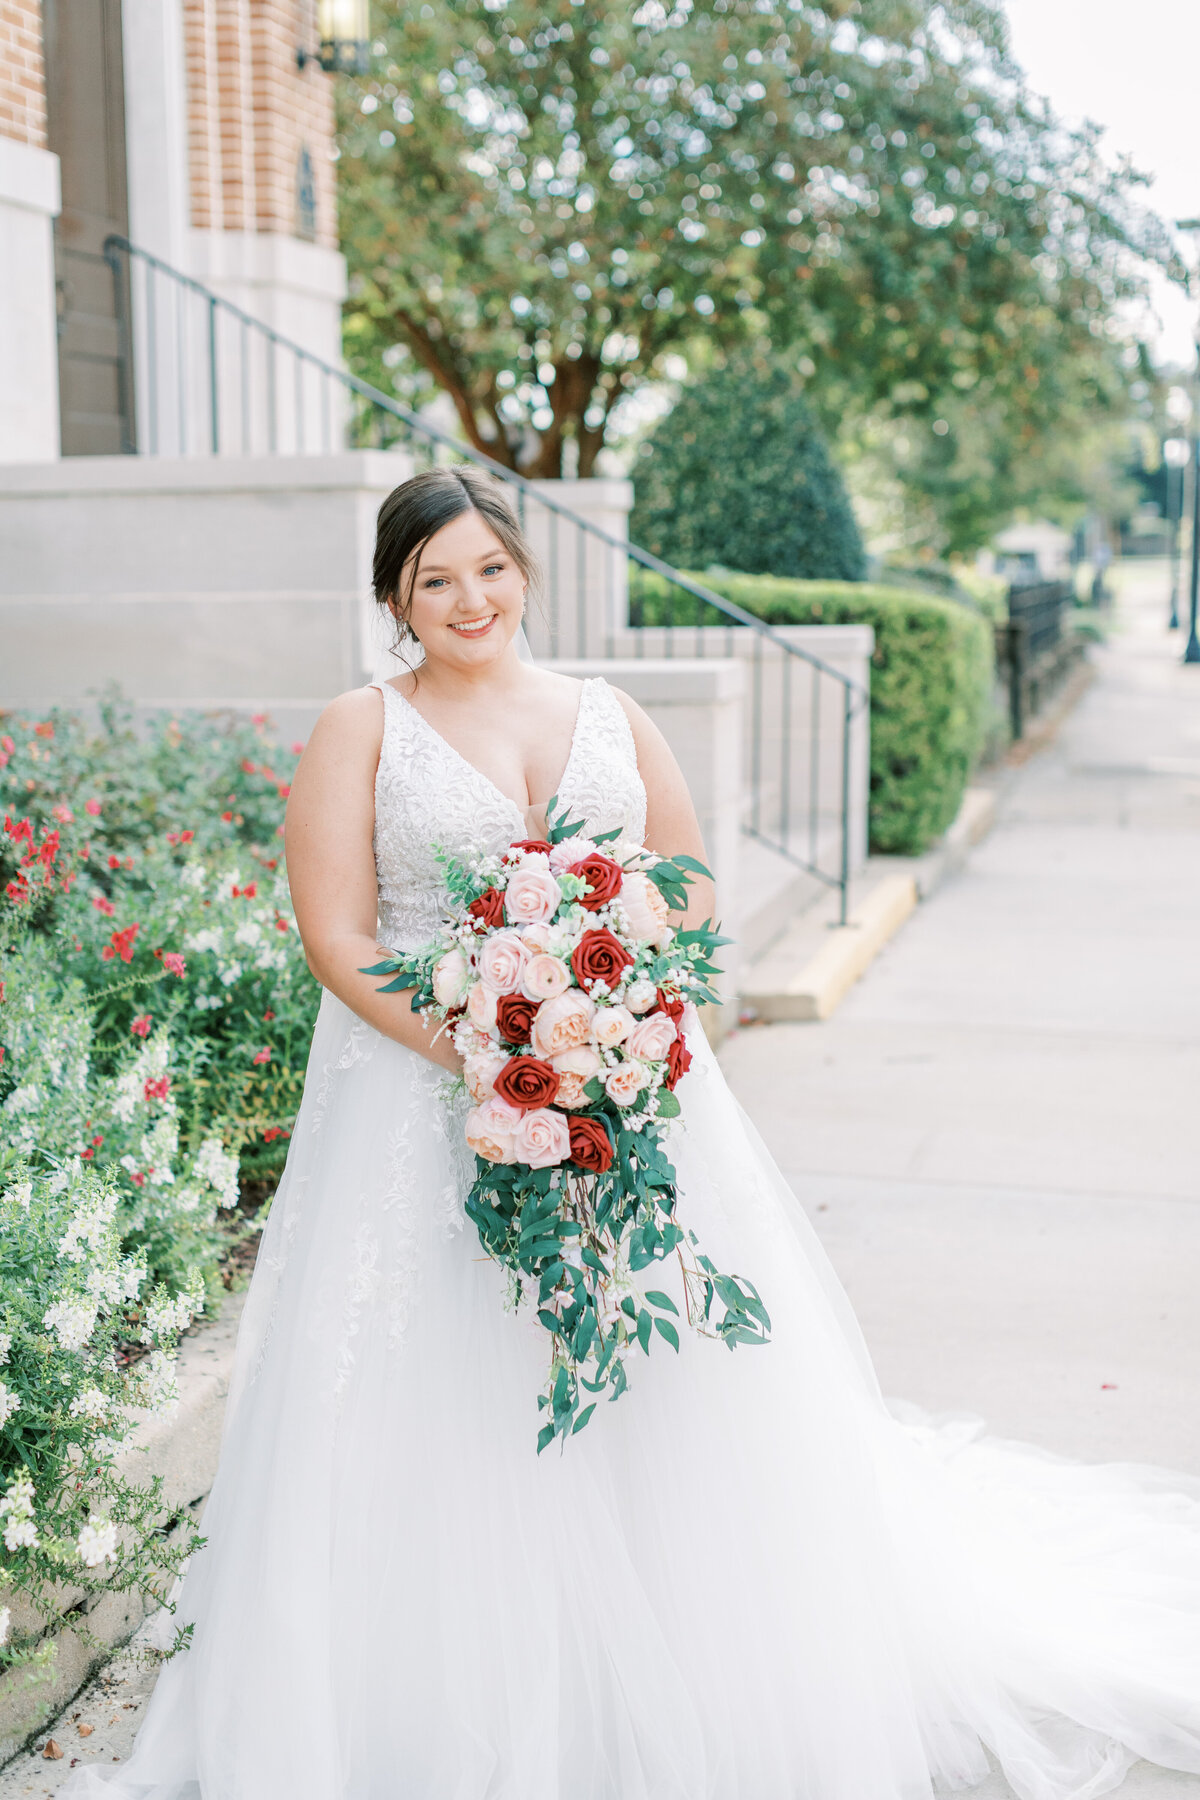 A bride holds her bouquet while standing in front of a church.